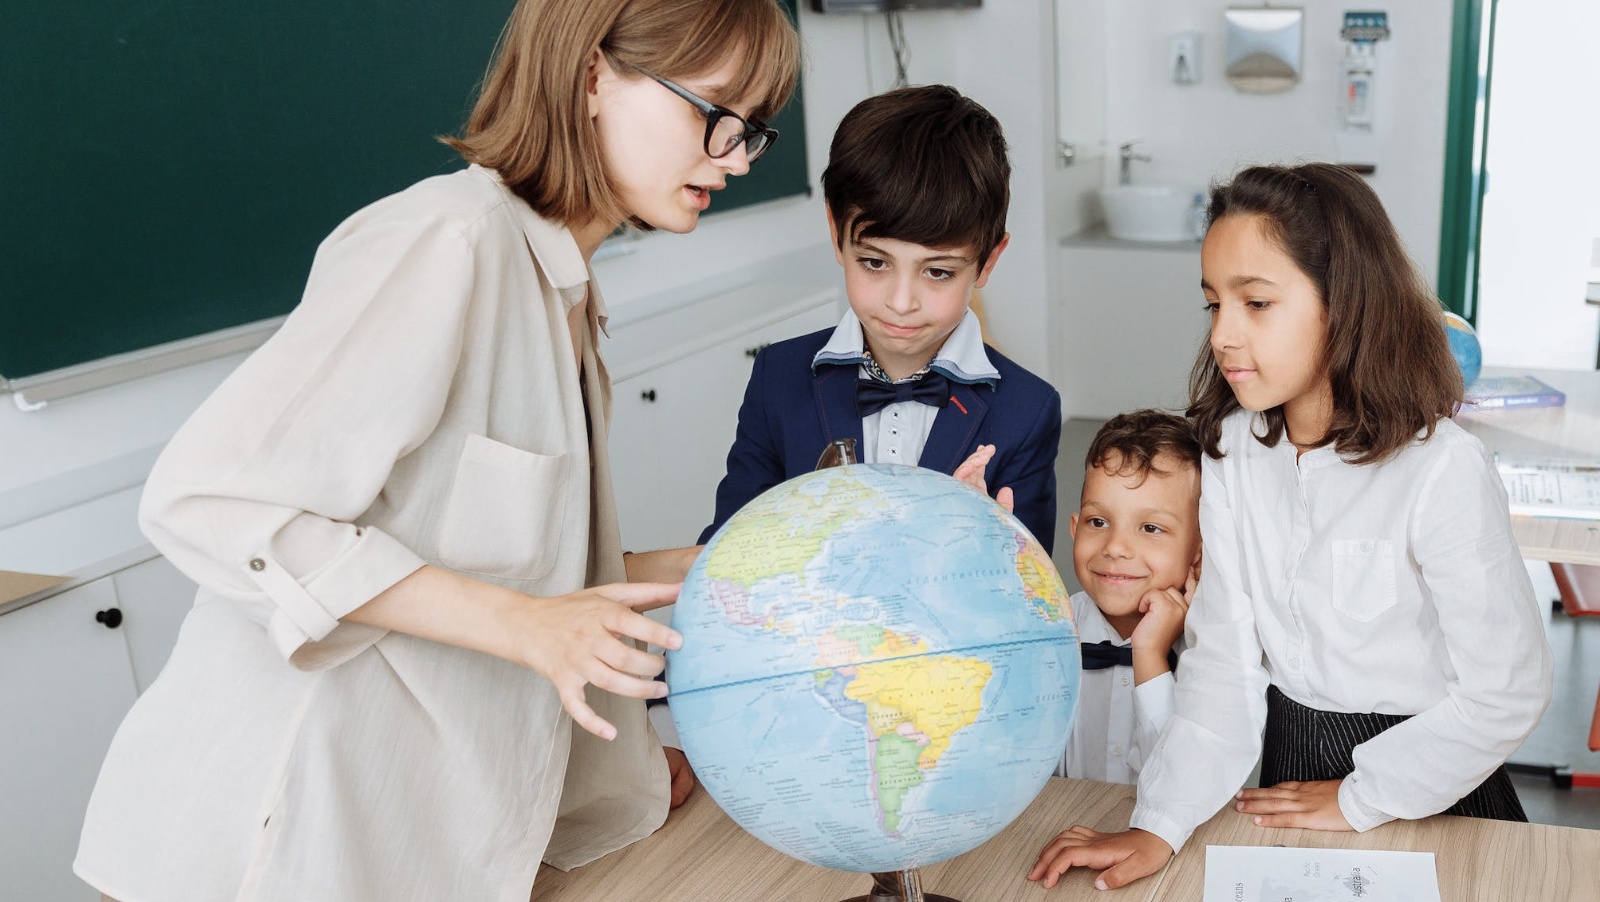 Students and teacher looking at a globe